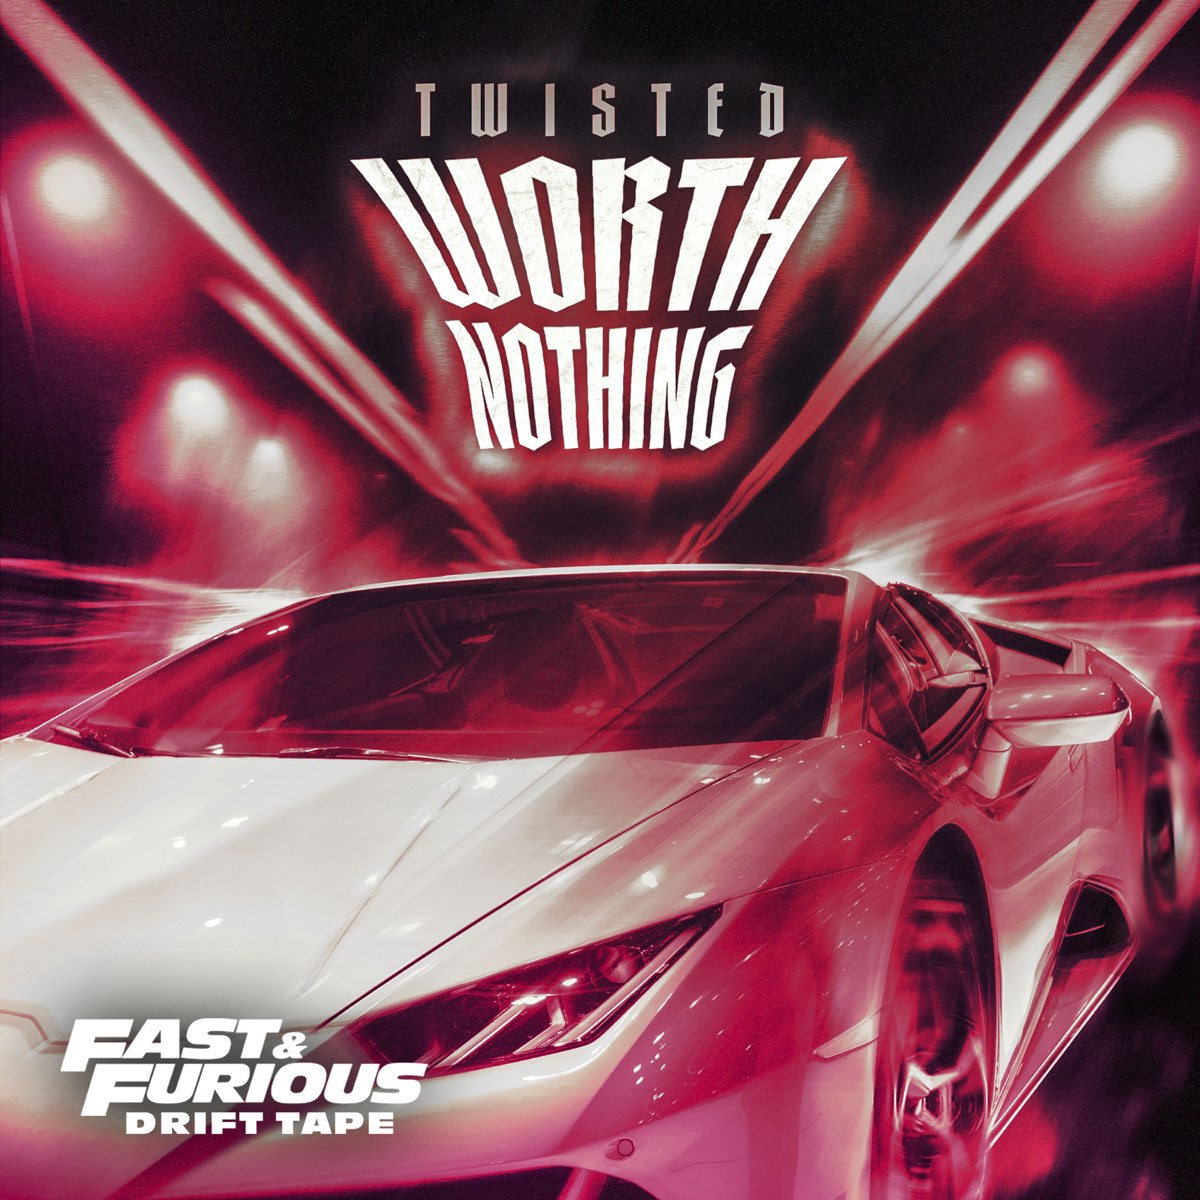 ‎Apple Music 上TWISTED的专辑《WORTH NOTHING (Fast & Furious Drift Tape